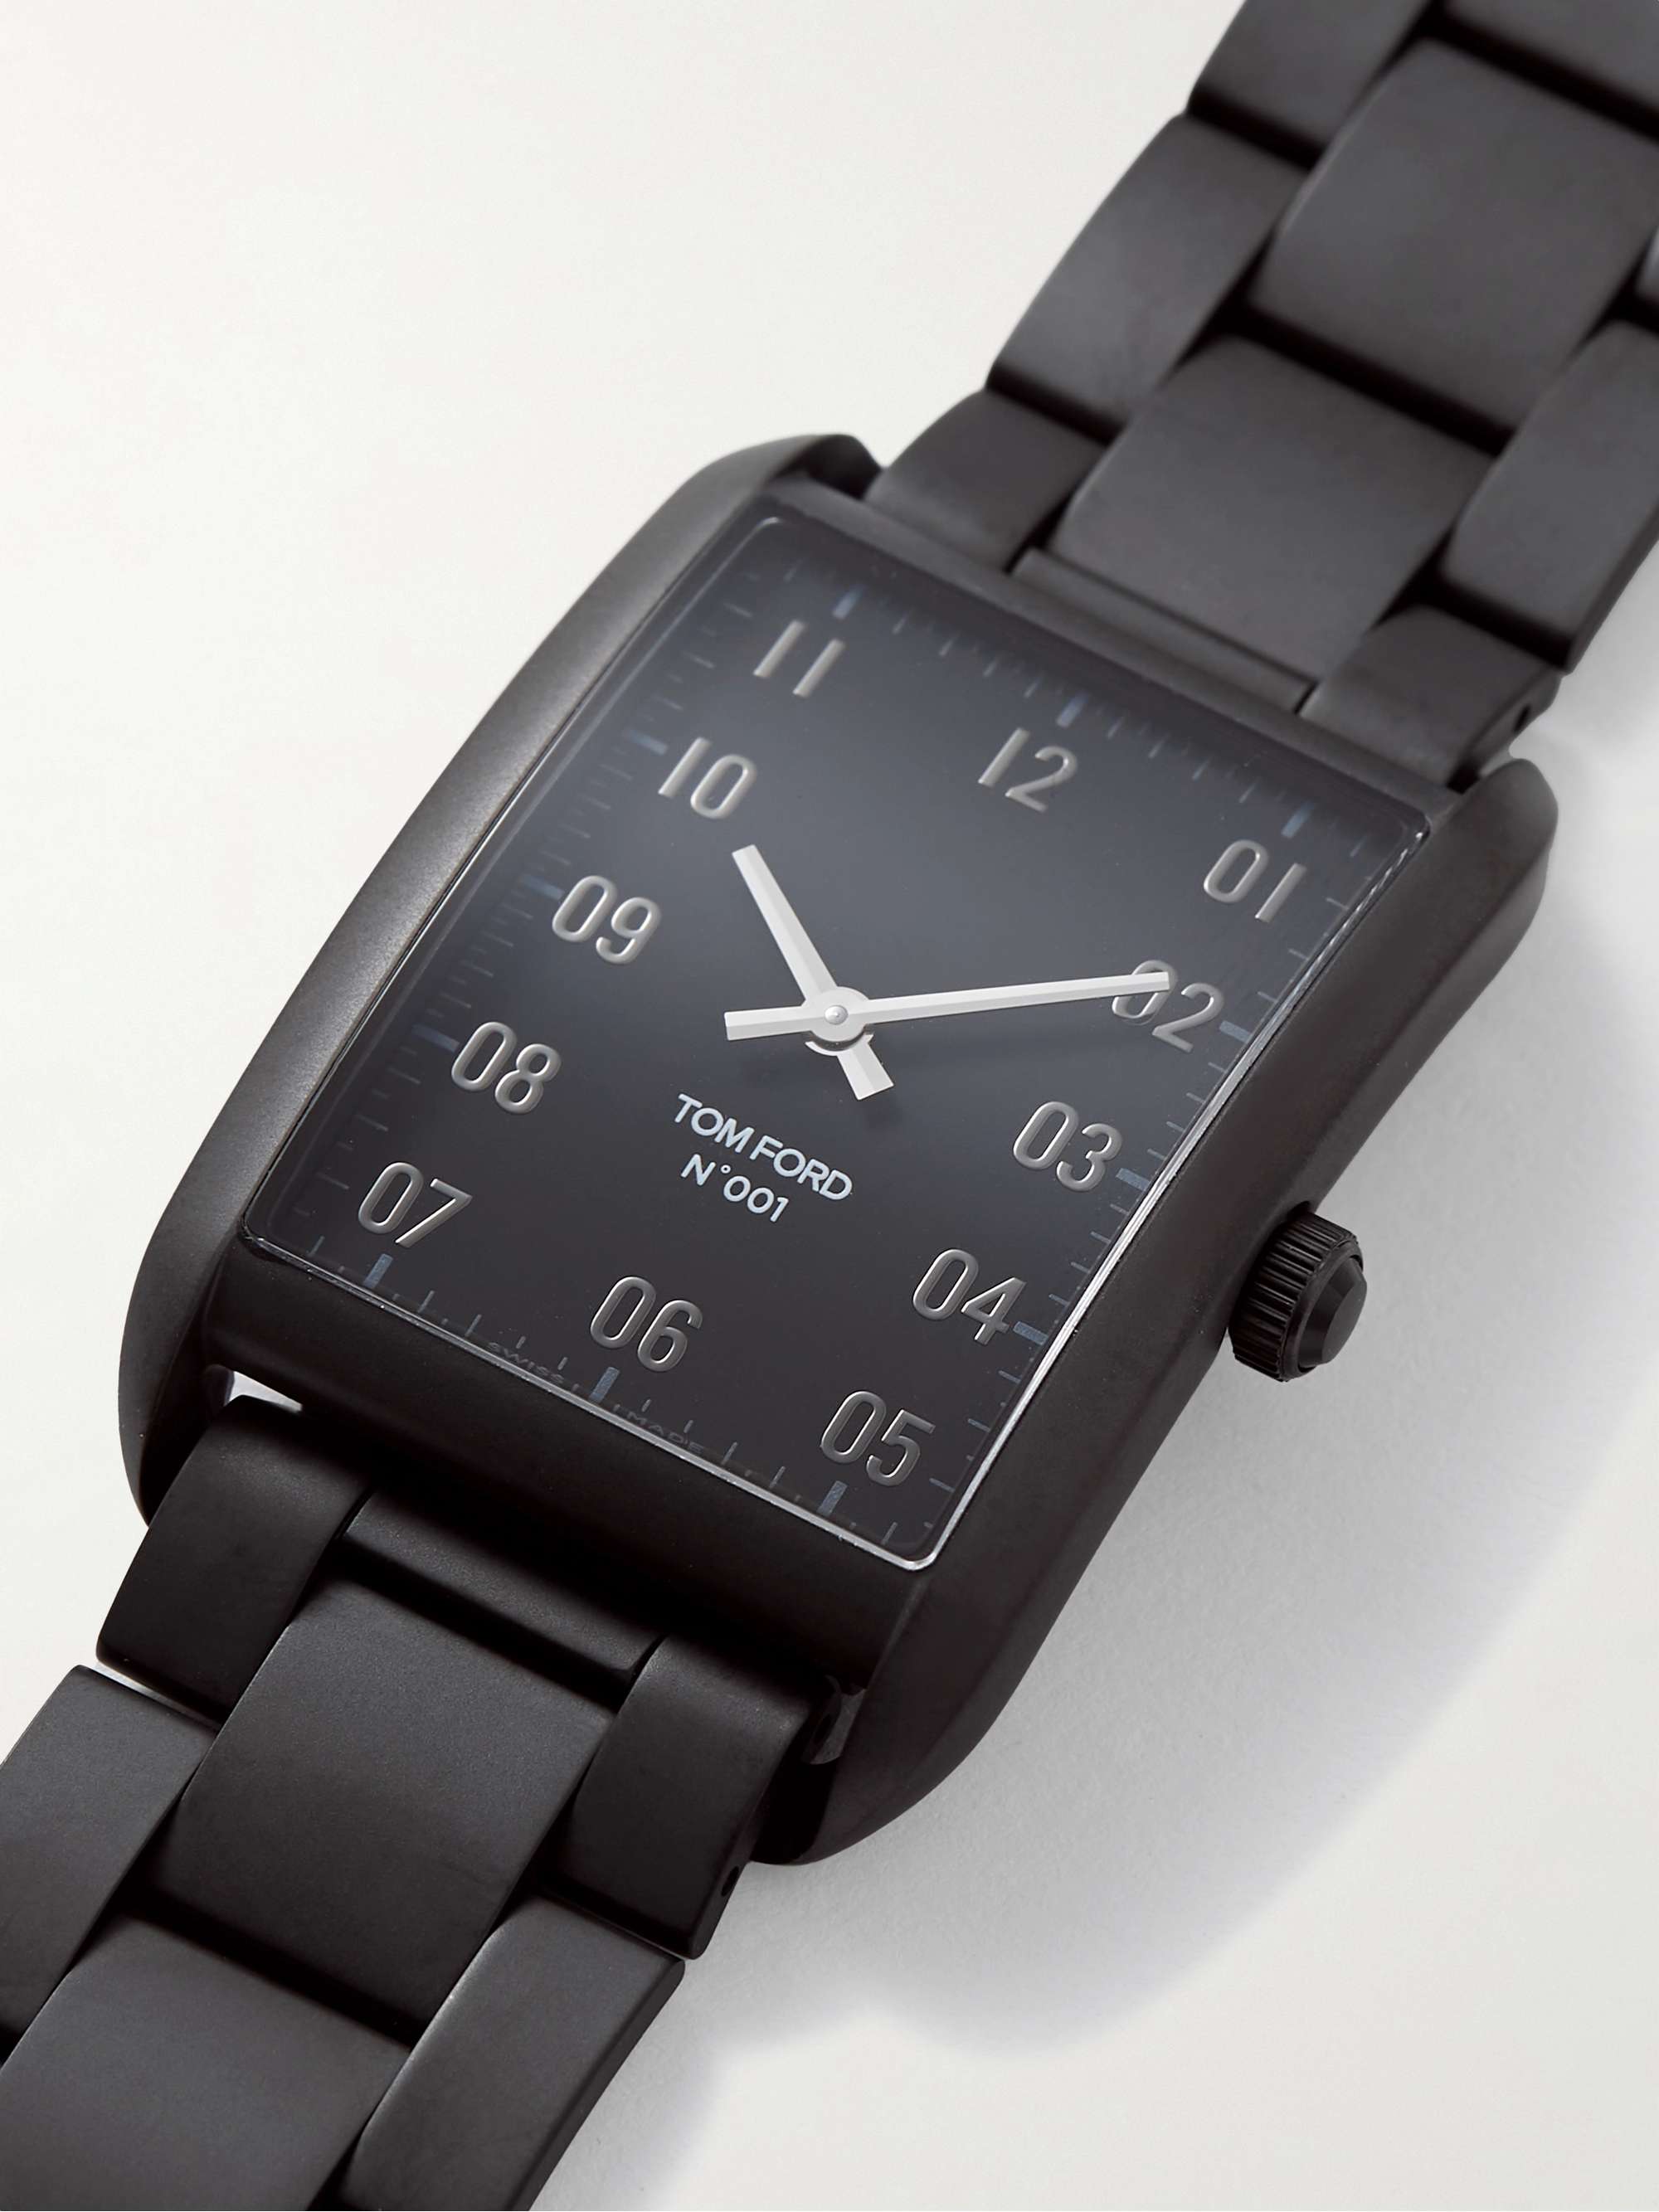 TOM FORD TIMEPIECES 001 DLC-Coated Stainless Steel Watch